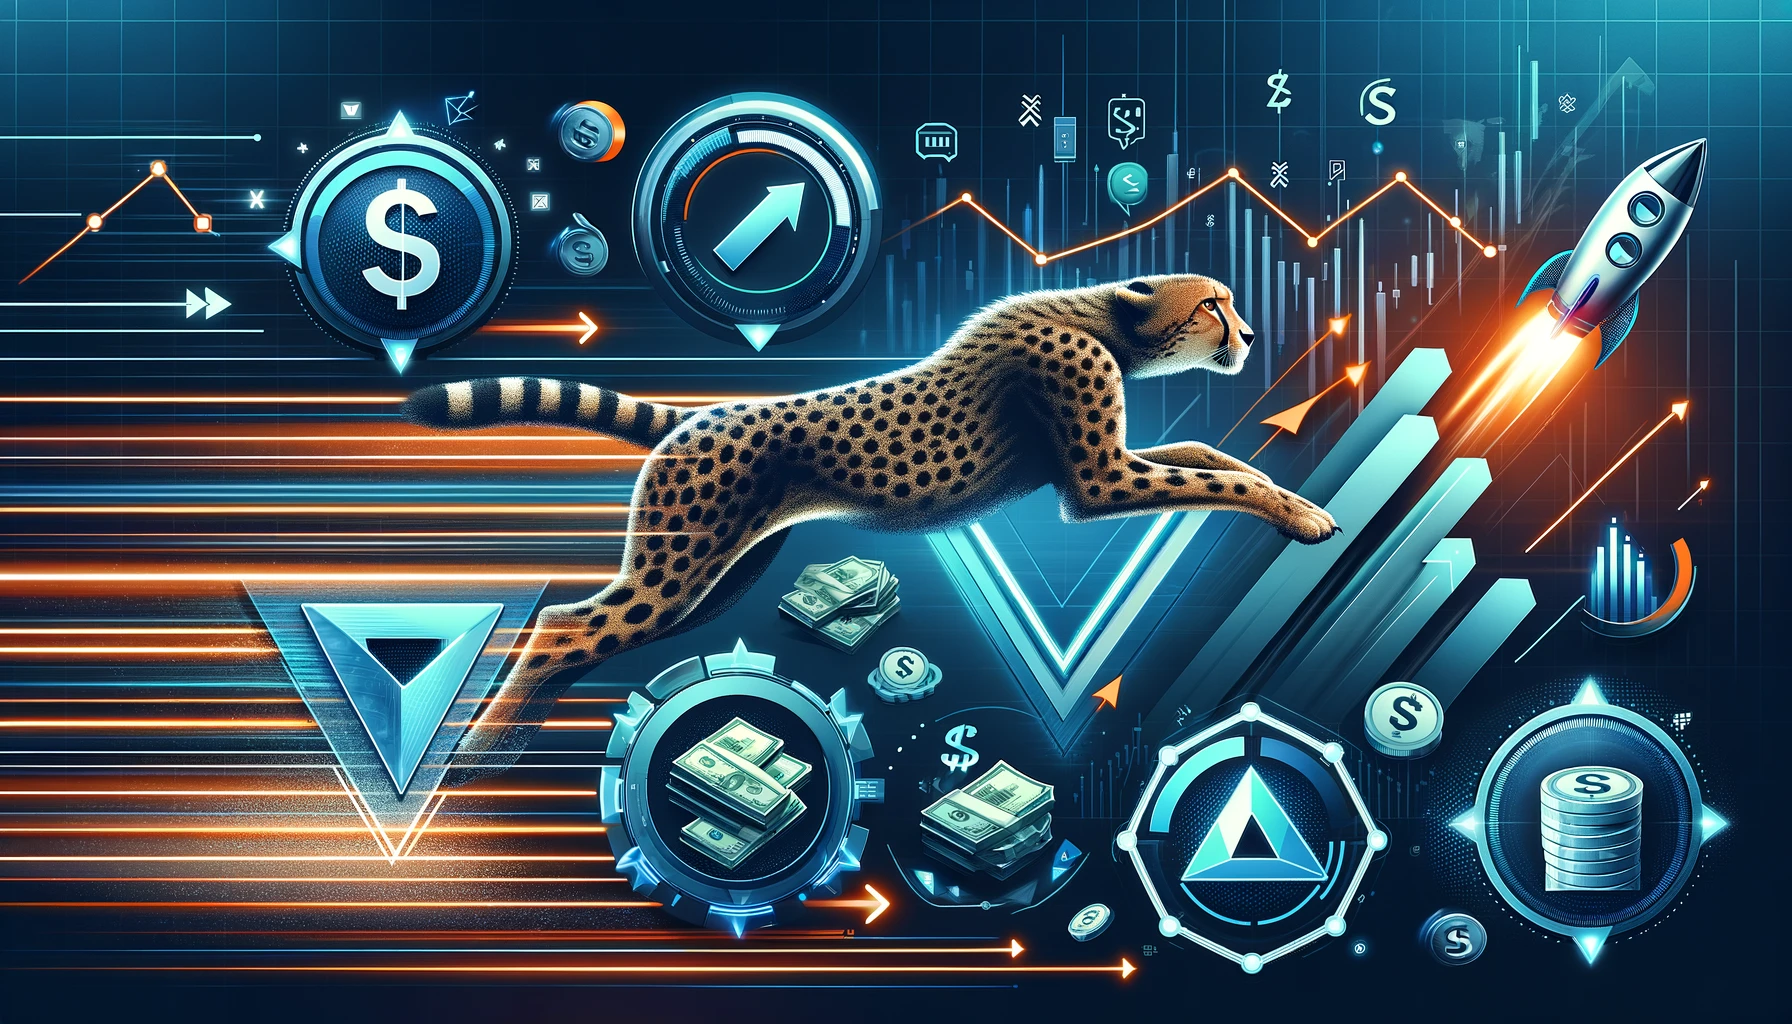 Image depicting the process of securing a cash advance as quick and efficient for boosting business cash flow. Cheetah in mid-sprint, embodying expedience, a simple 'play' triangle to represent straightforwardness, and a rocket ascending against a backdrop of currency to indicate a rapid boost in cash flow.